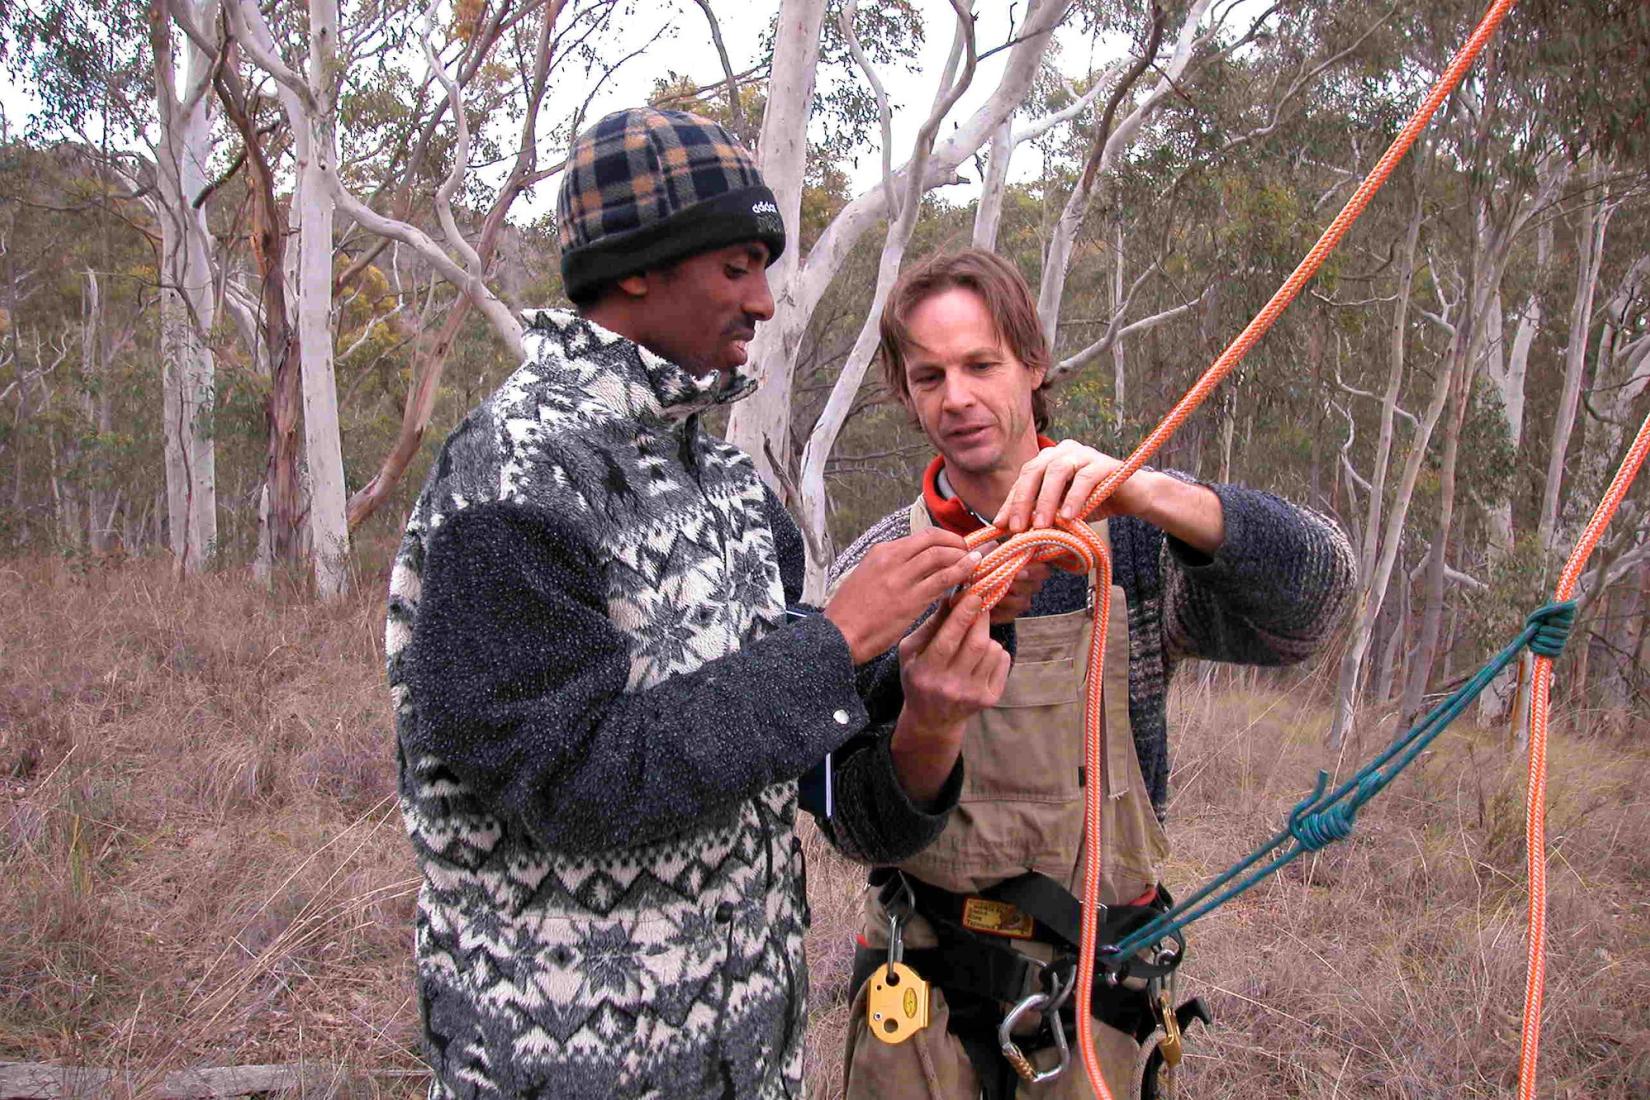 Belachew Gizachew of the Ethiopian Forestry Research Centre receives training in safe tree climbing techniques for seed collection from CSIRO’s John Larmour during an attachment in Australia under the SAT program. Photo: Kron Aken